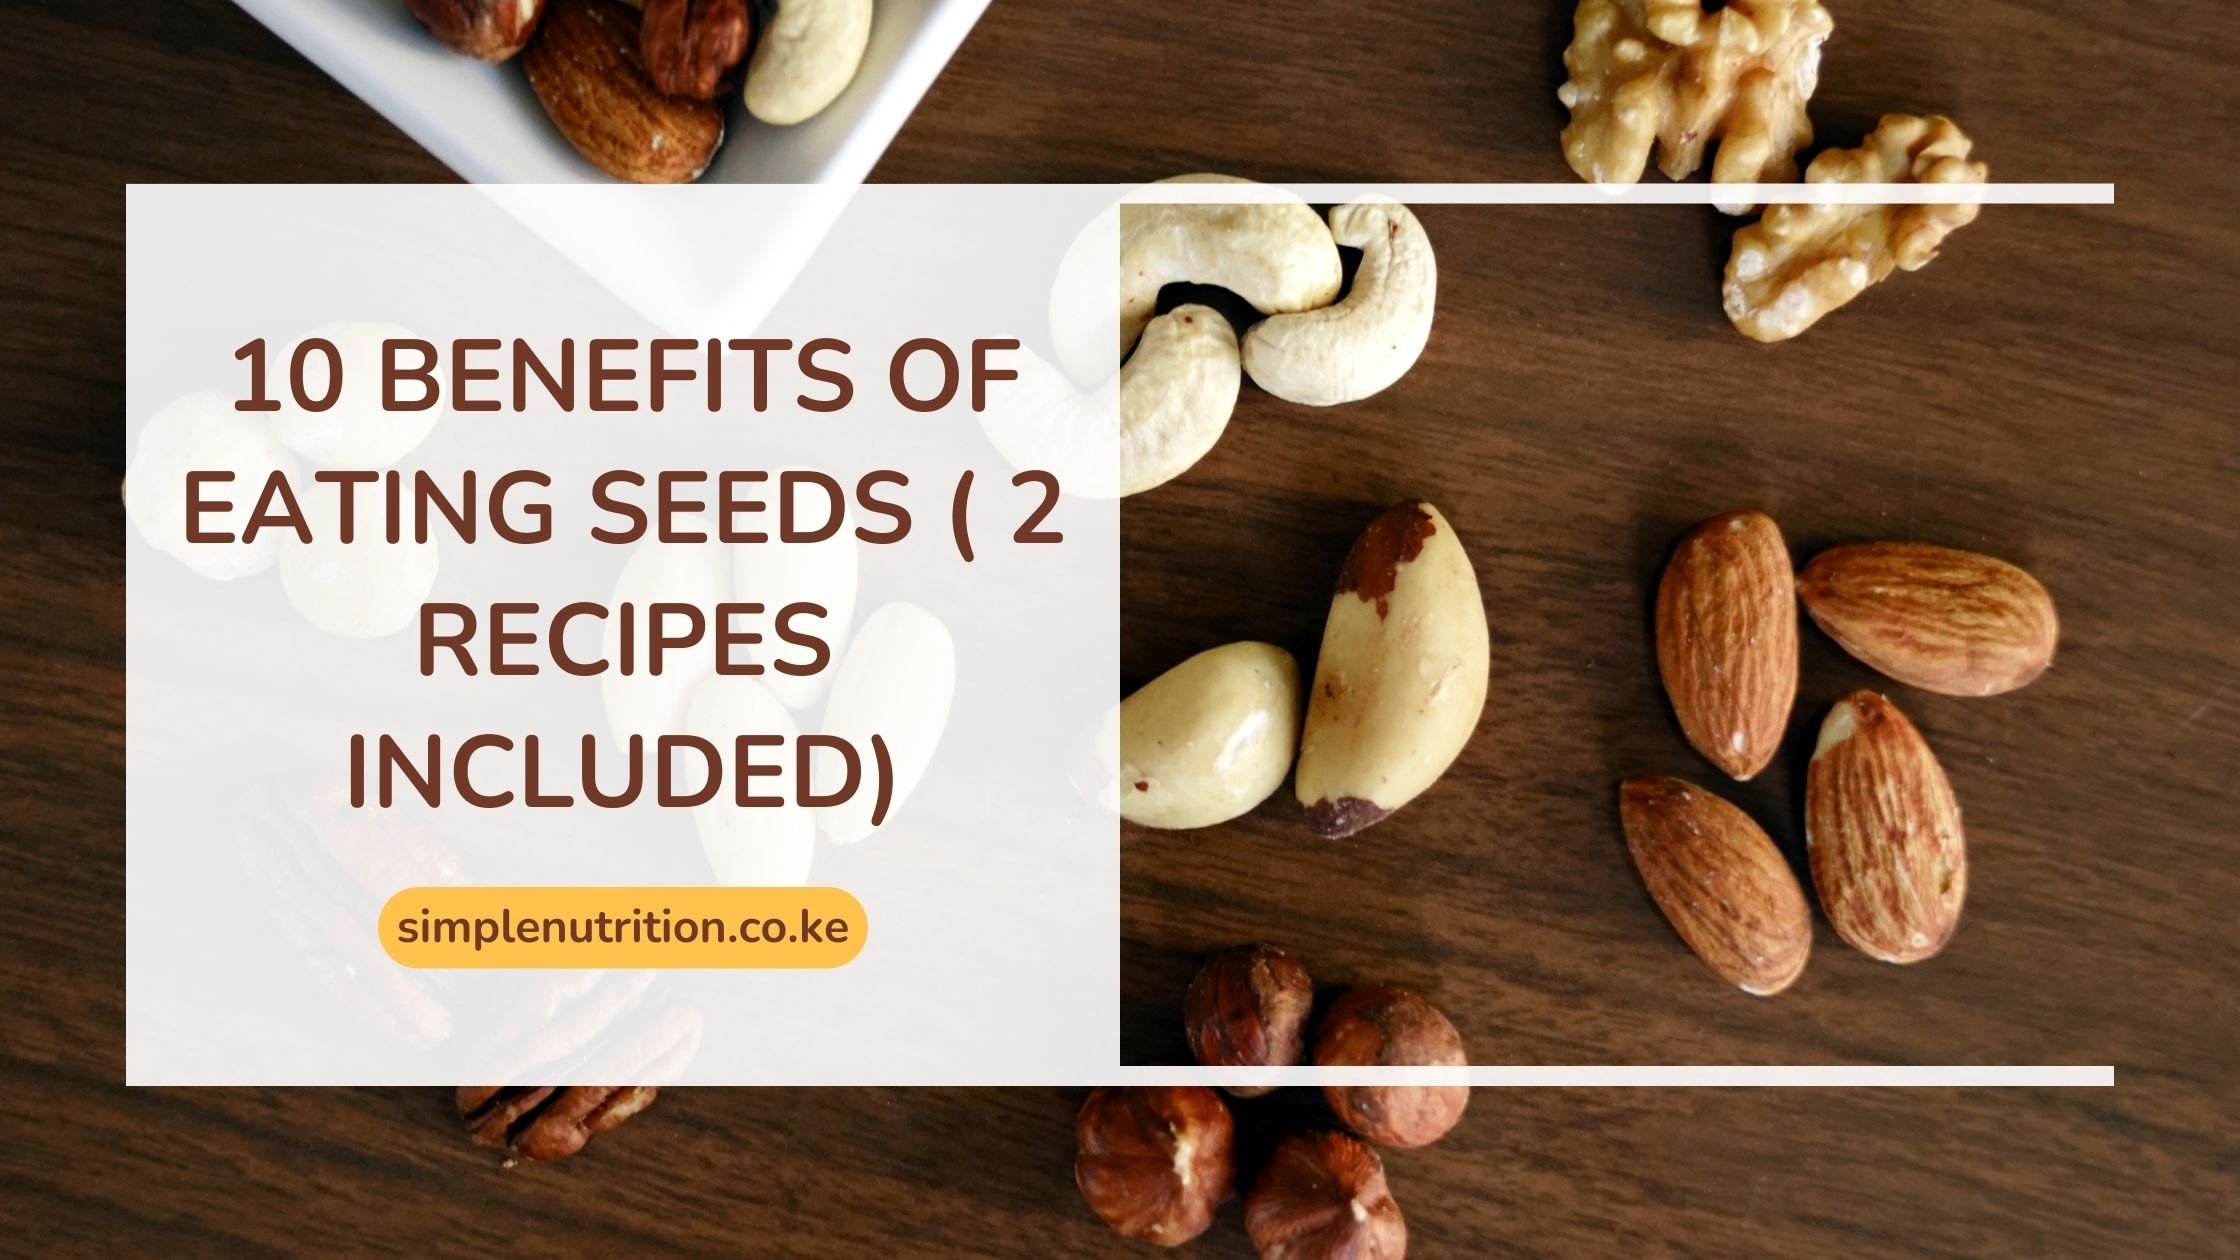 Here’s what you need to know about Eating seeds.